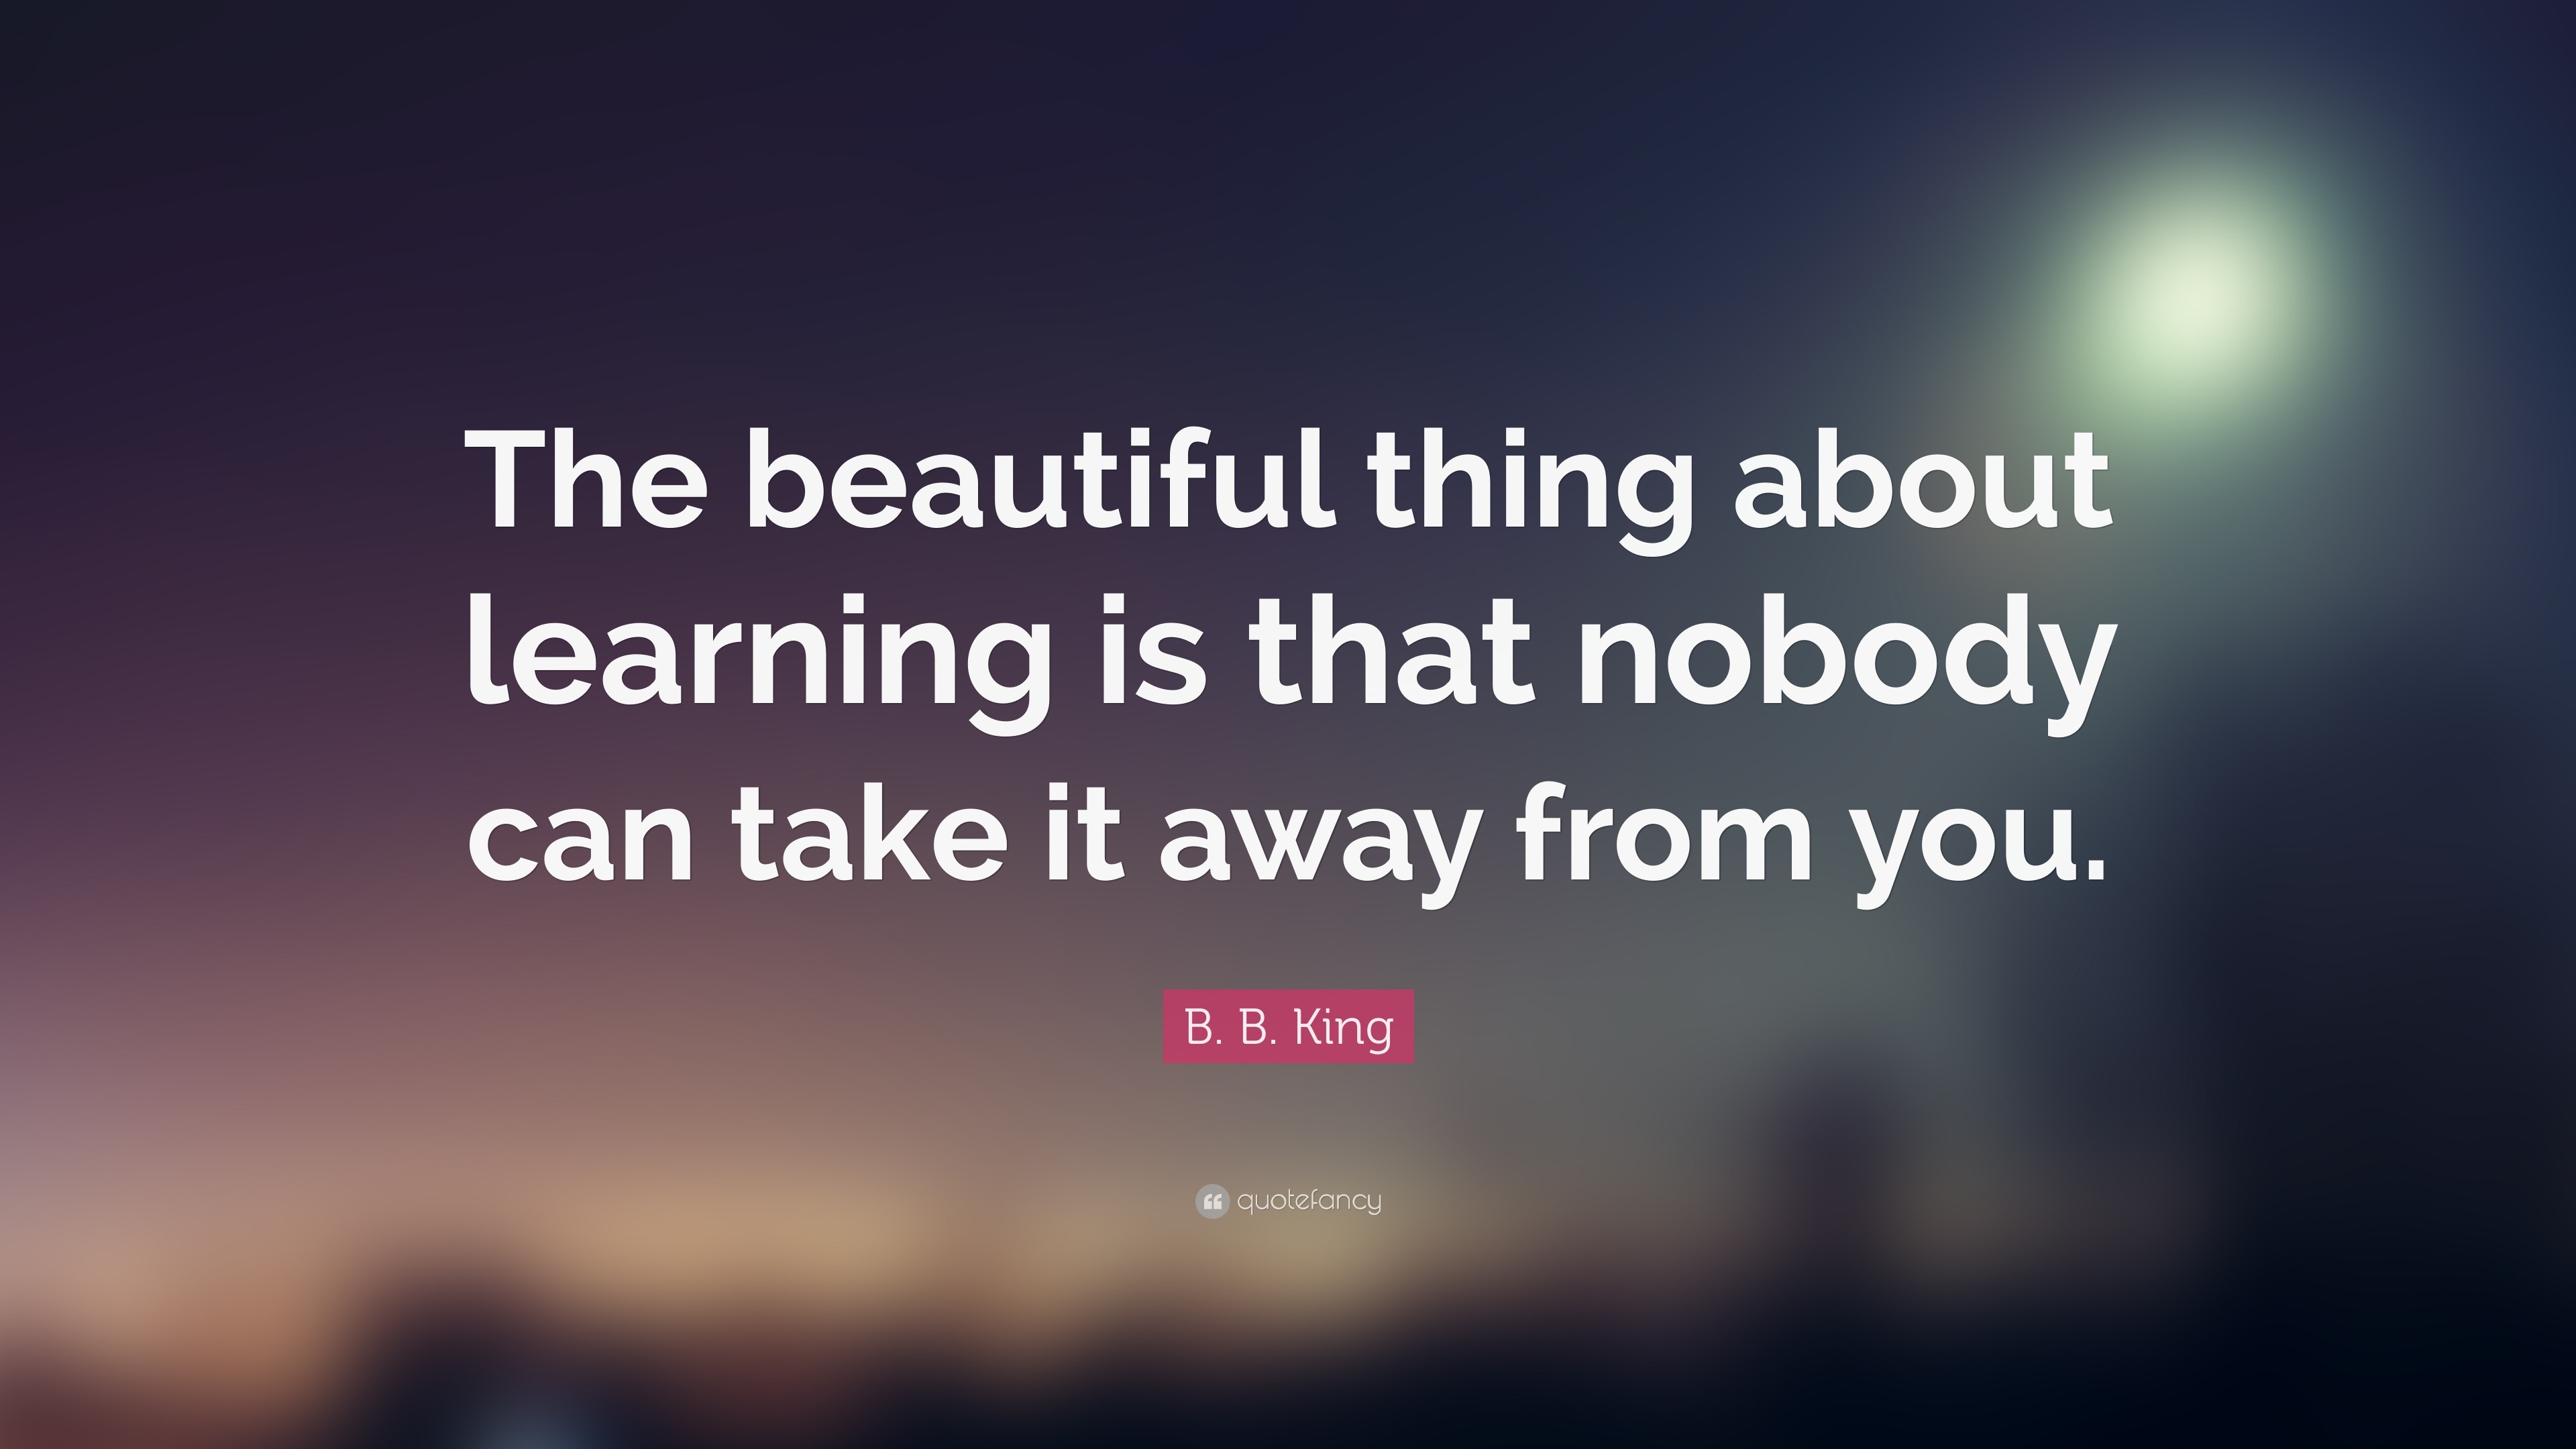 B. B. King Quote: “The beautiful thing about learning is that nobody can  take it away from